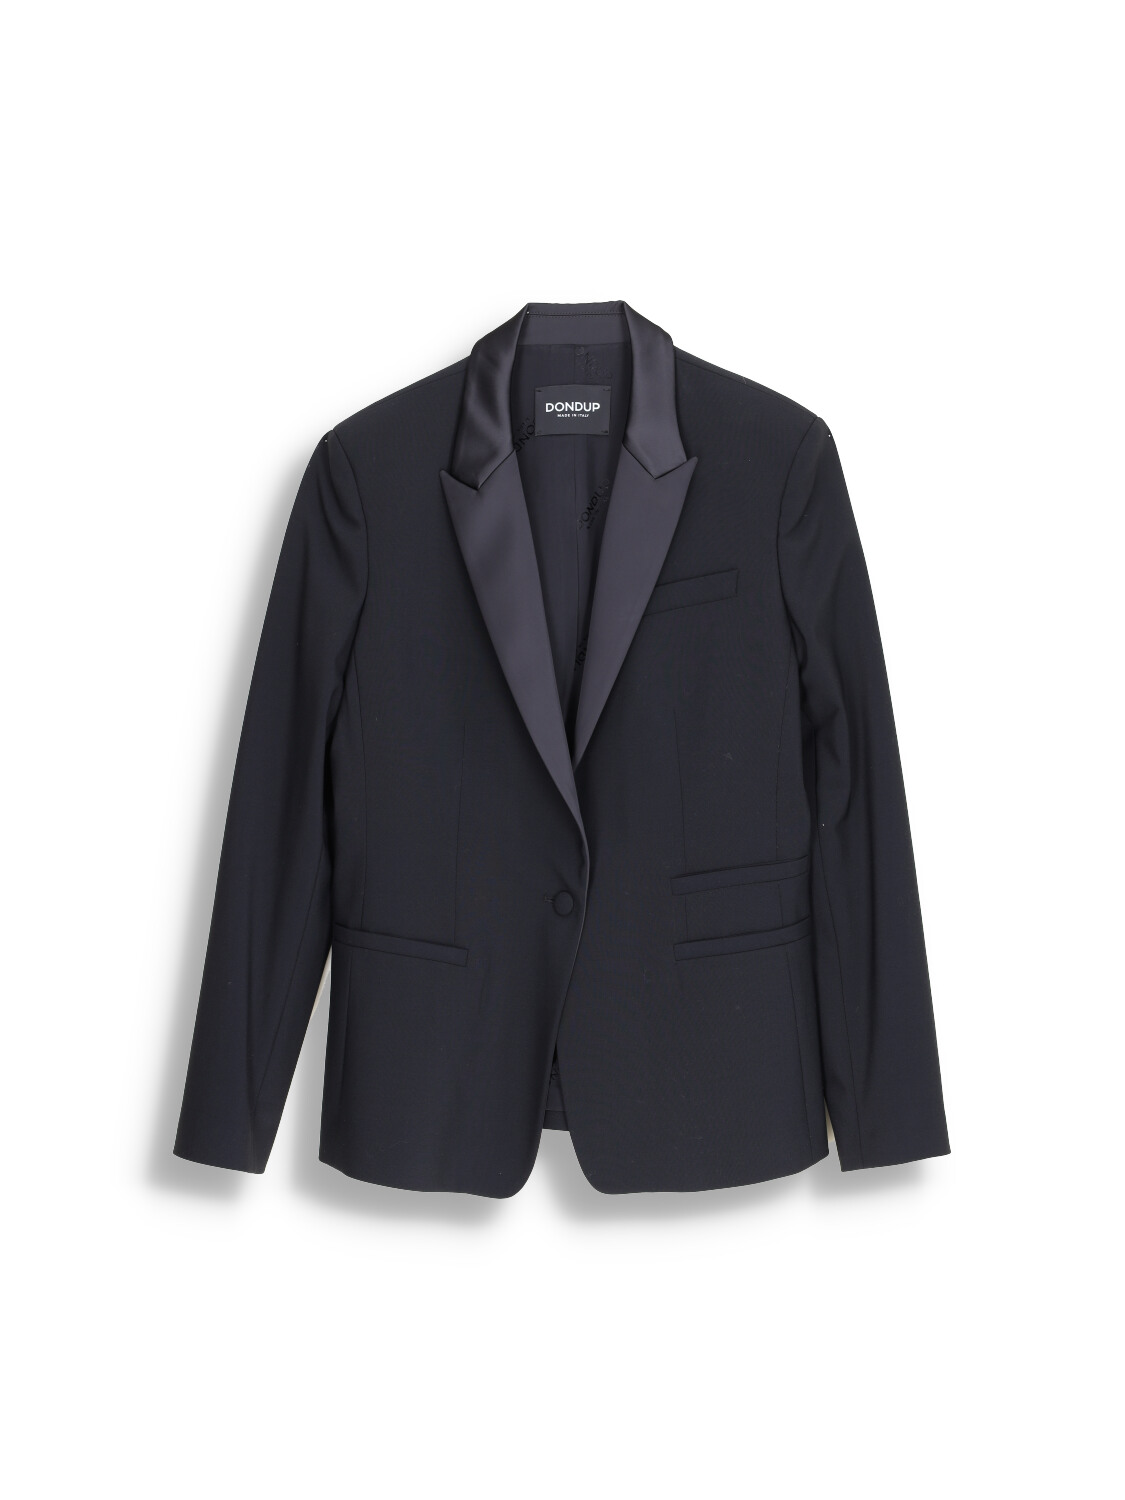 A classic blazer with reverse collar